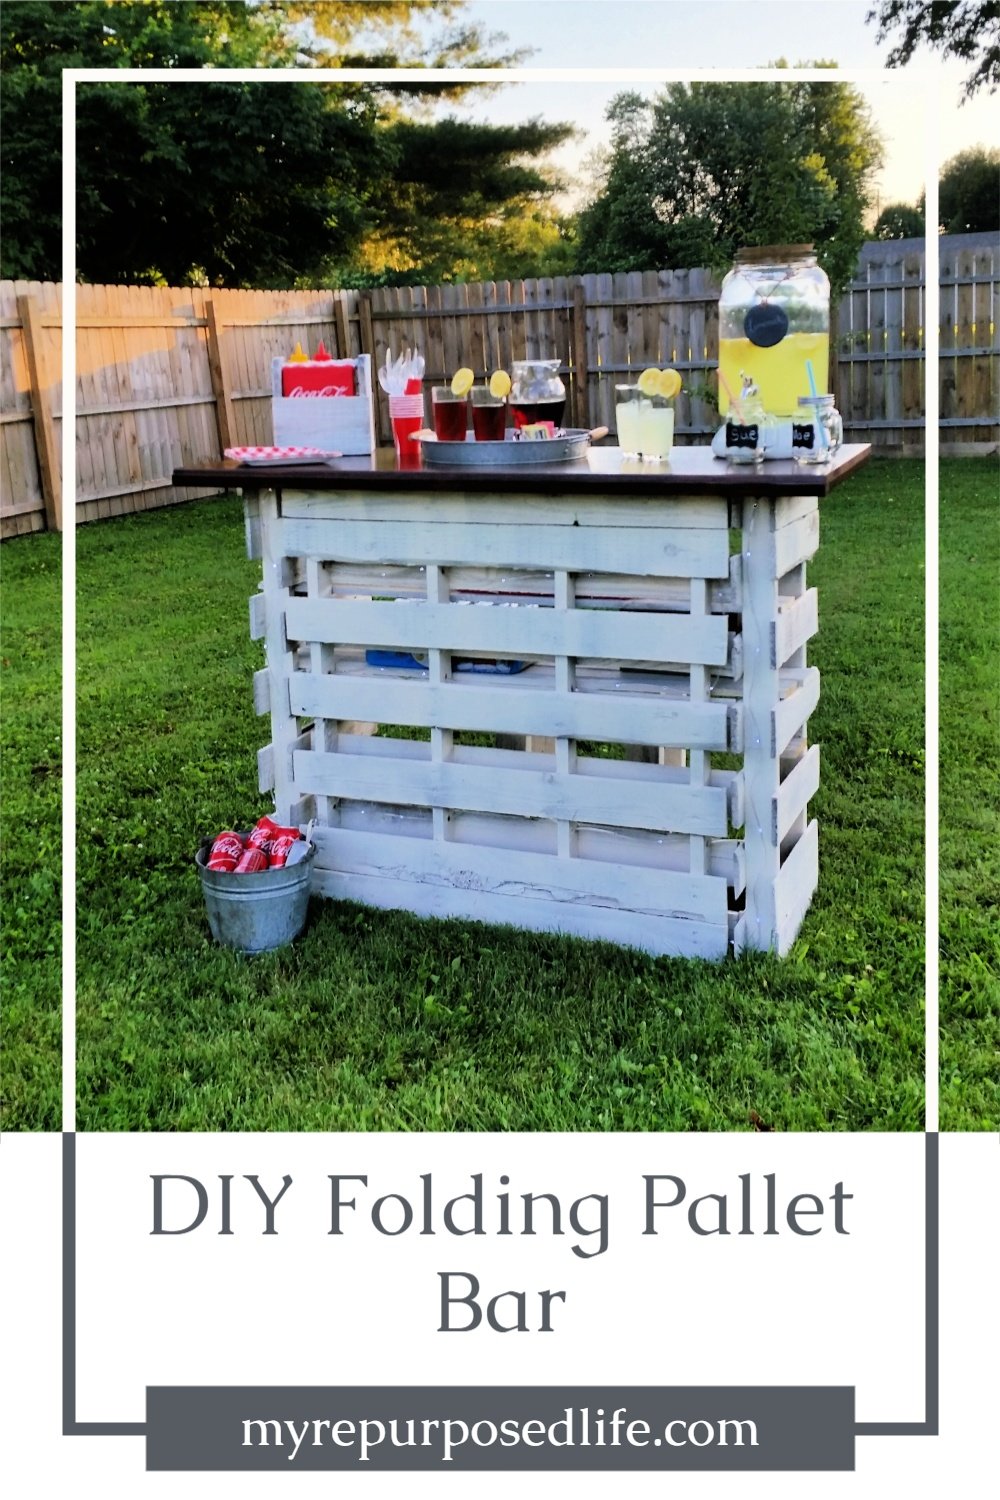 This DIY pallet bar that folds for storage is perfect for tailgating or special events such as weddings and more. Step by step directions how to make this folding pallet bar. #MyRepurposedLife #repurposed #pallet #bar #portable #diy via @repurposedlife